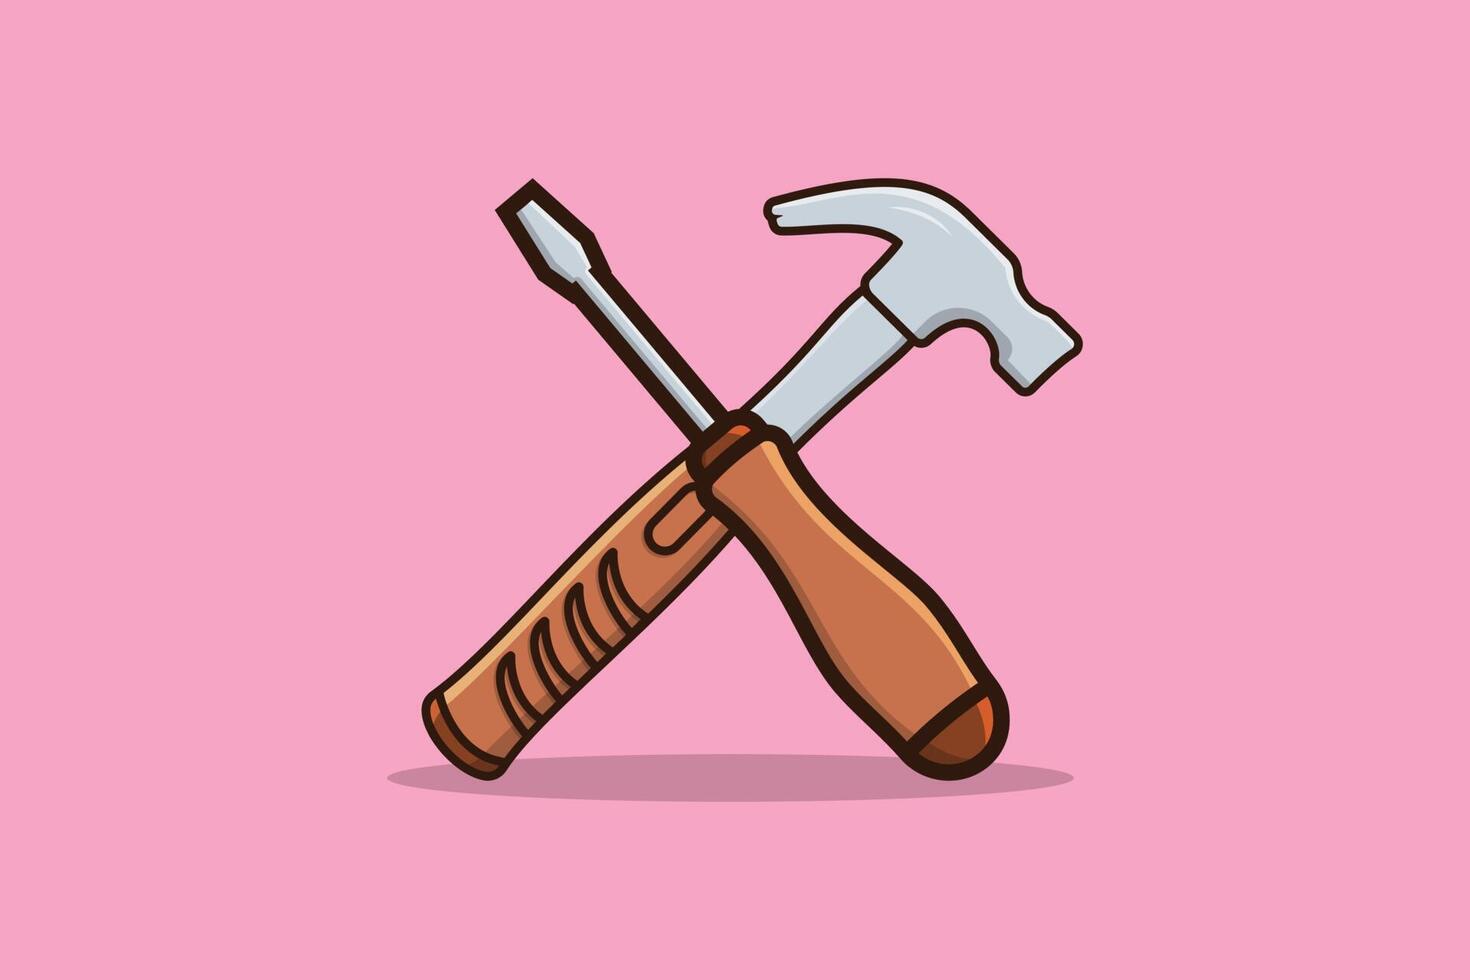 Screwdriver and Claw Hammer tools vector illustration. Working tools equipment objects icon concept. Claw Hammer tool and Screwdriver in cross sign vector design on pink background.